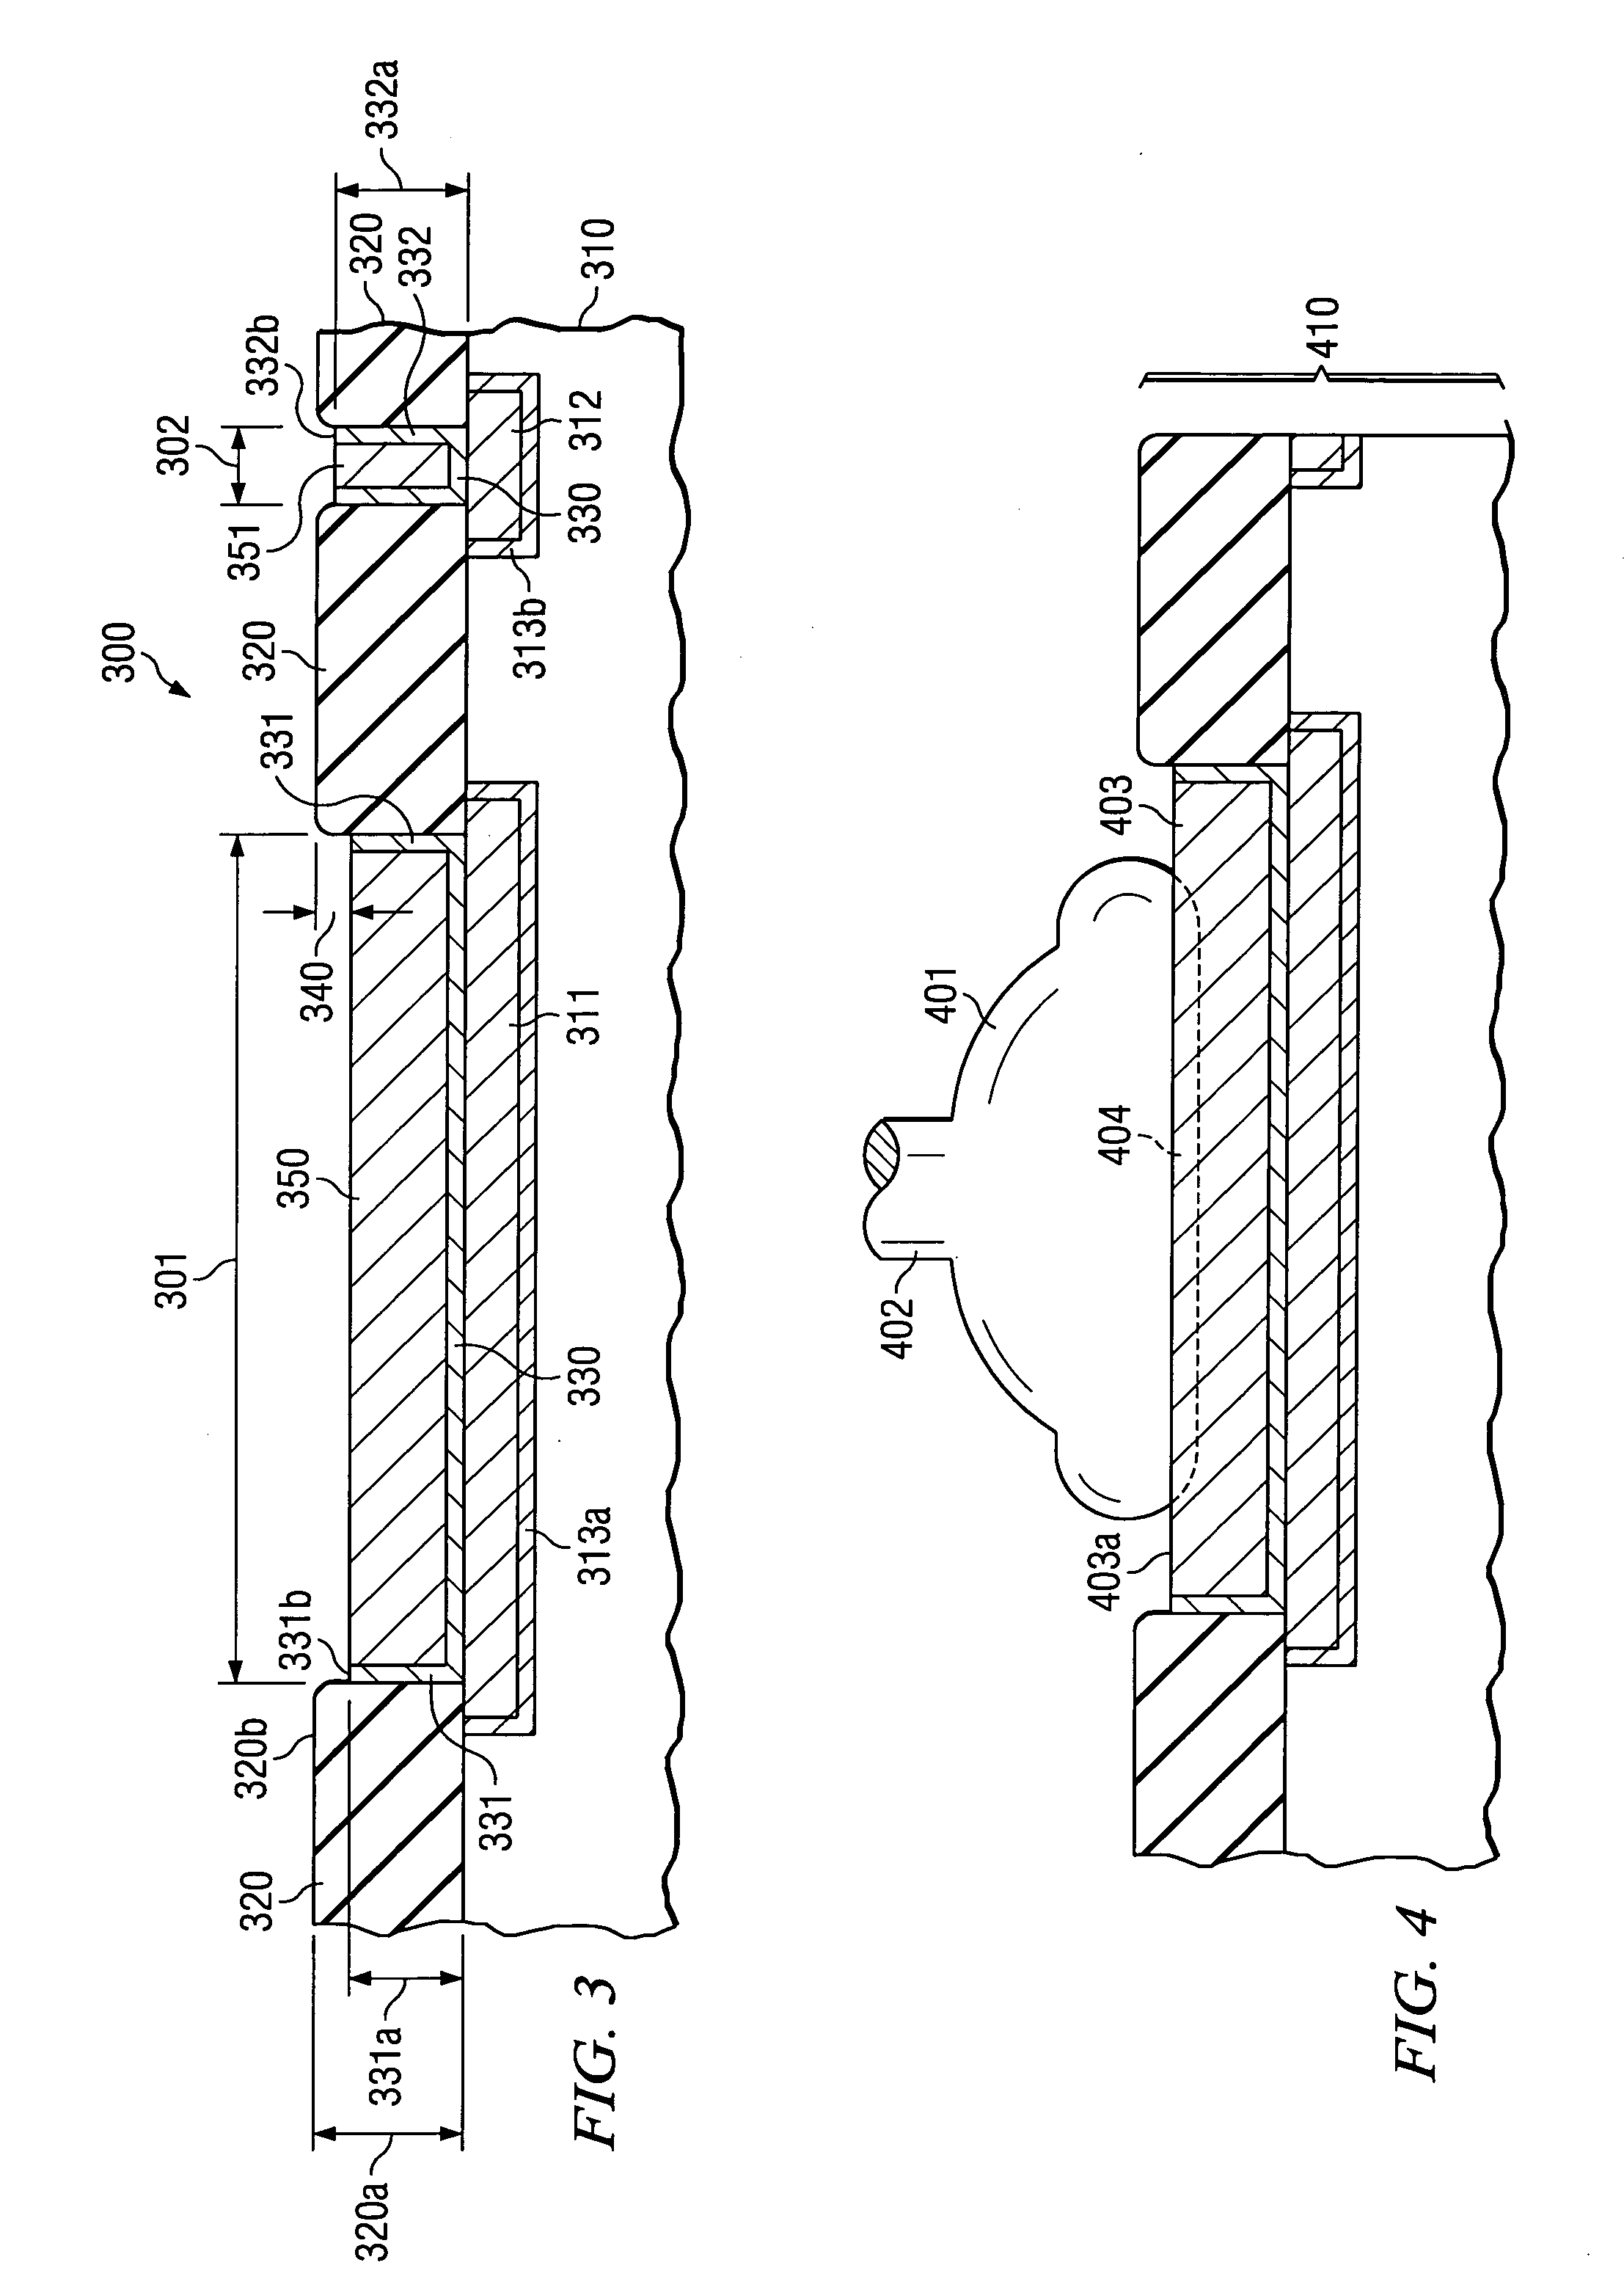 Structure and method for contact pads having a recessed bondable metal plug over of copper-metallized integrated circuits